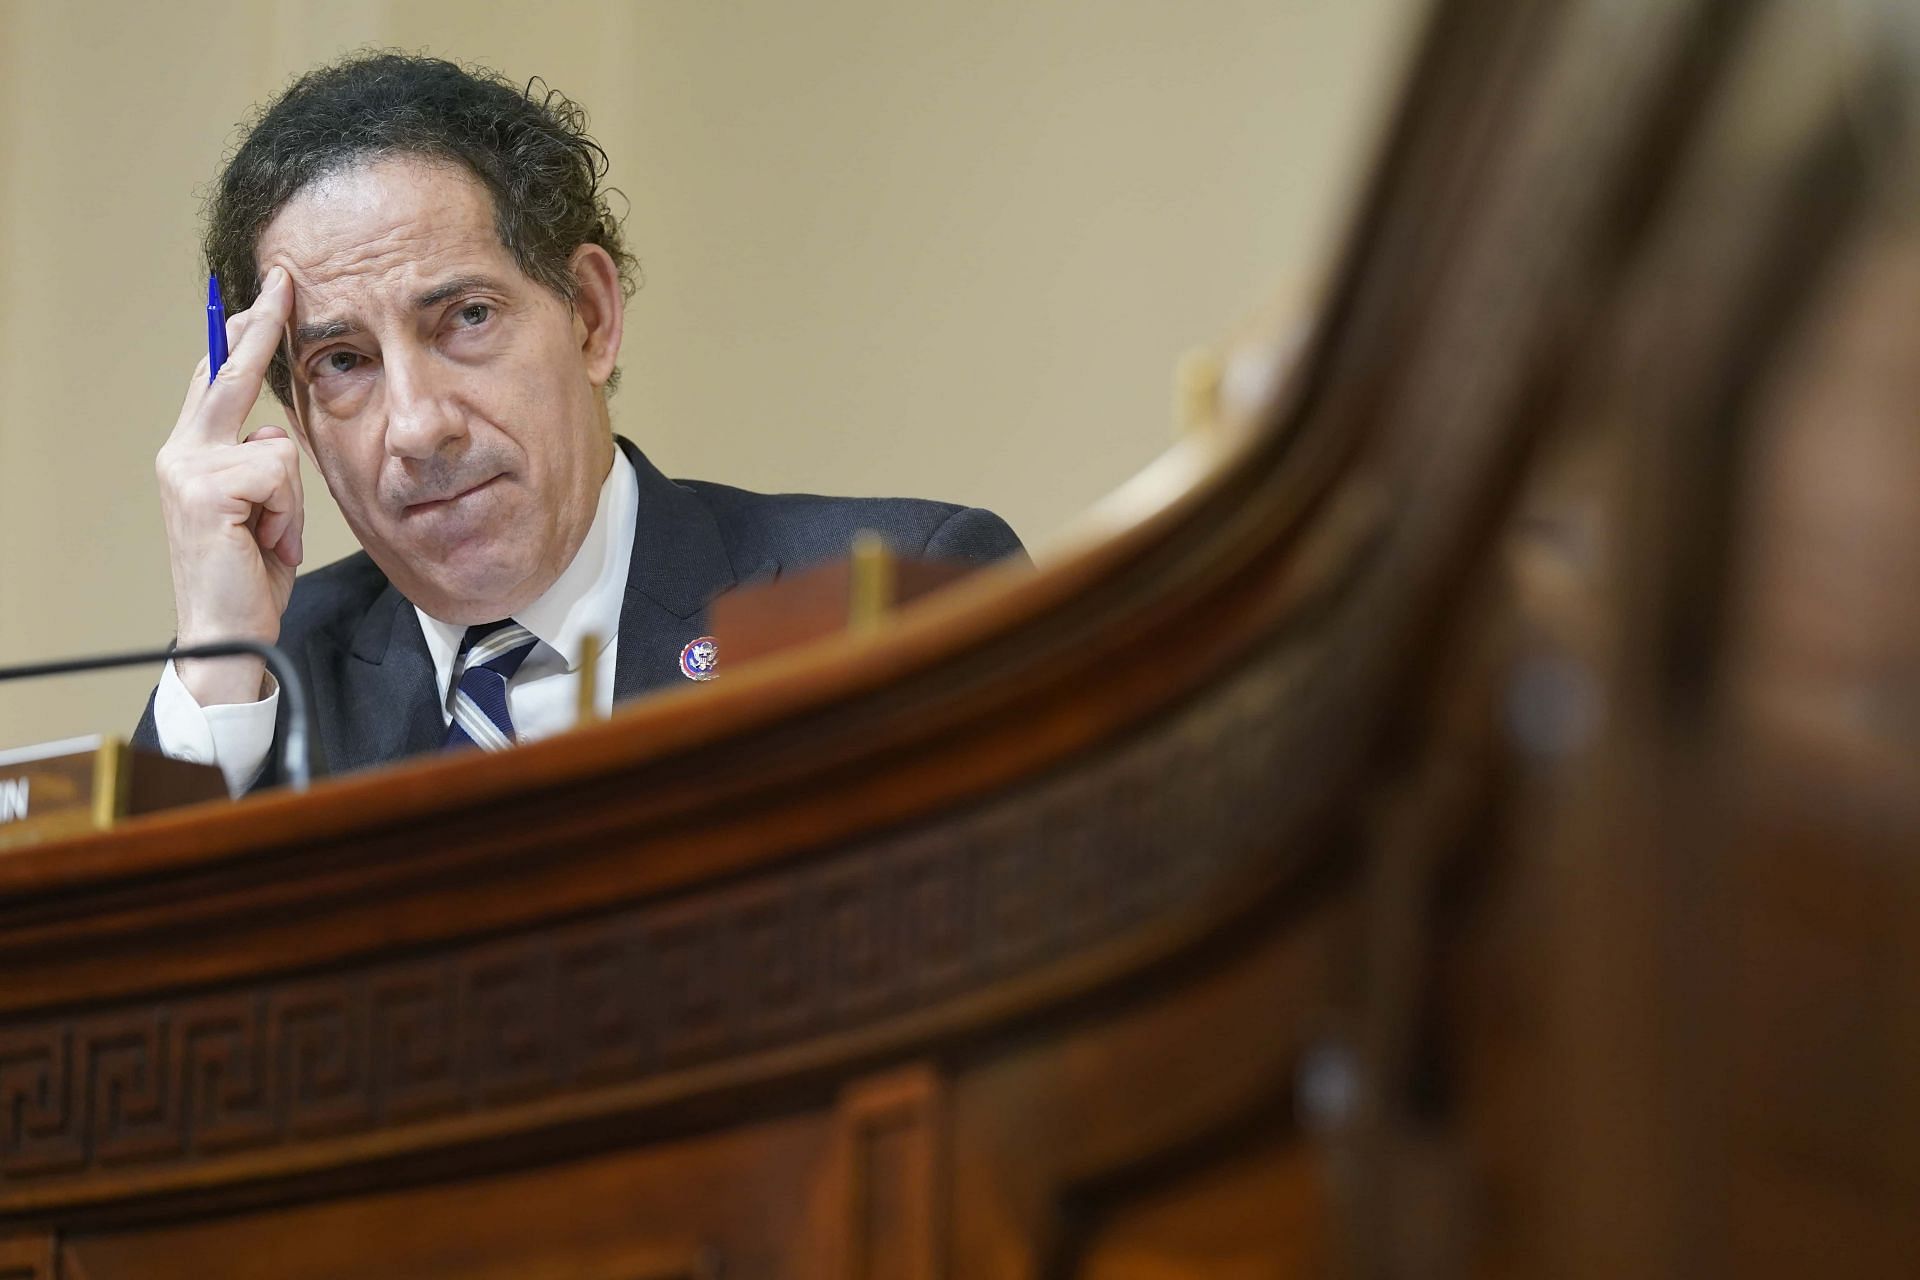 Jamie Raskin at a hearing investigating the Capitol Riots (Image via Andrew Harnik-Pool/Getty Images)